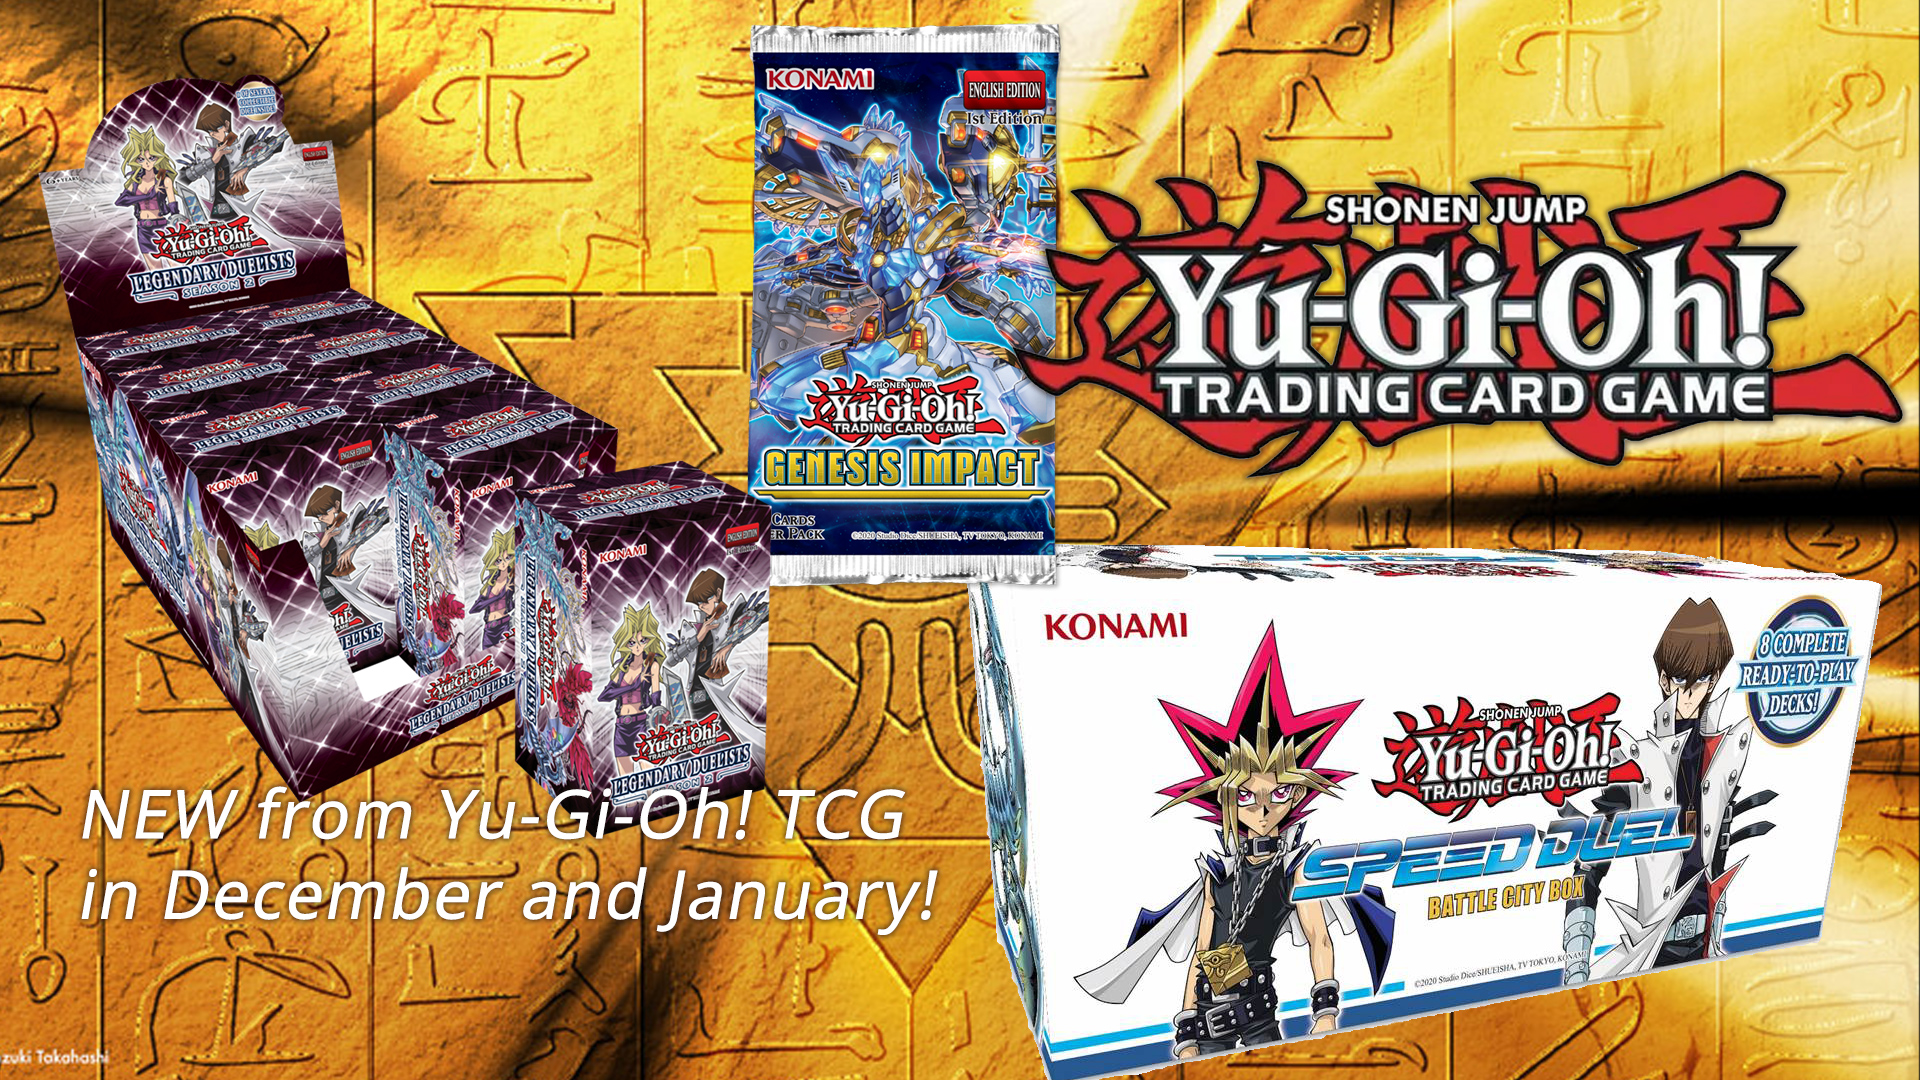 NEW from YuGiOh! TCG in December and January! YuGiOh! World